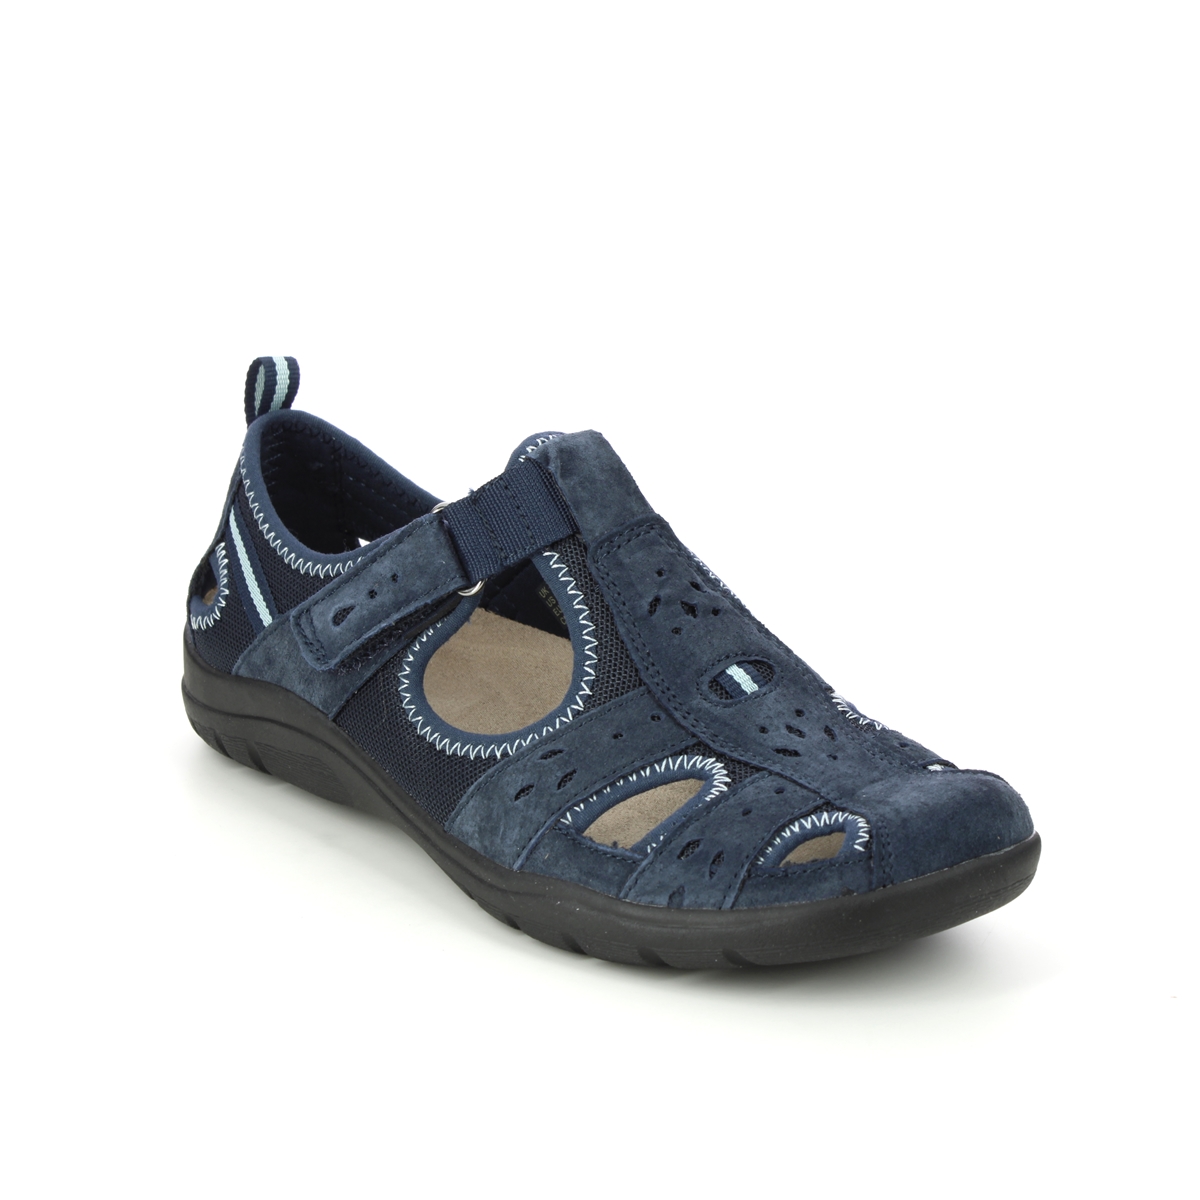 Earth Spirit Cleveland 01 Navy Suede Womens Closed Toe Sandals 40501-73 in a Plain Leather in Size 4